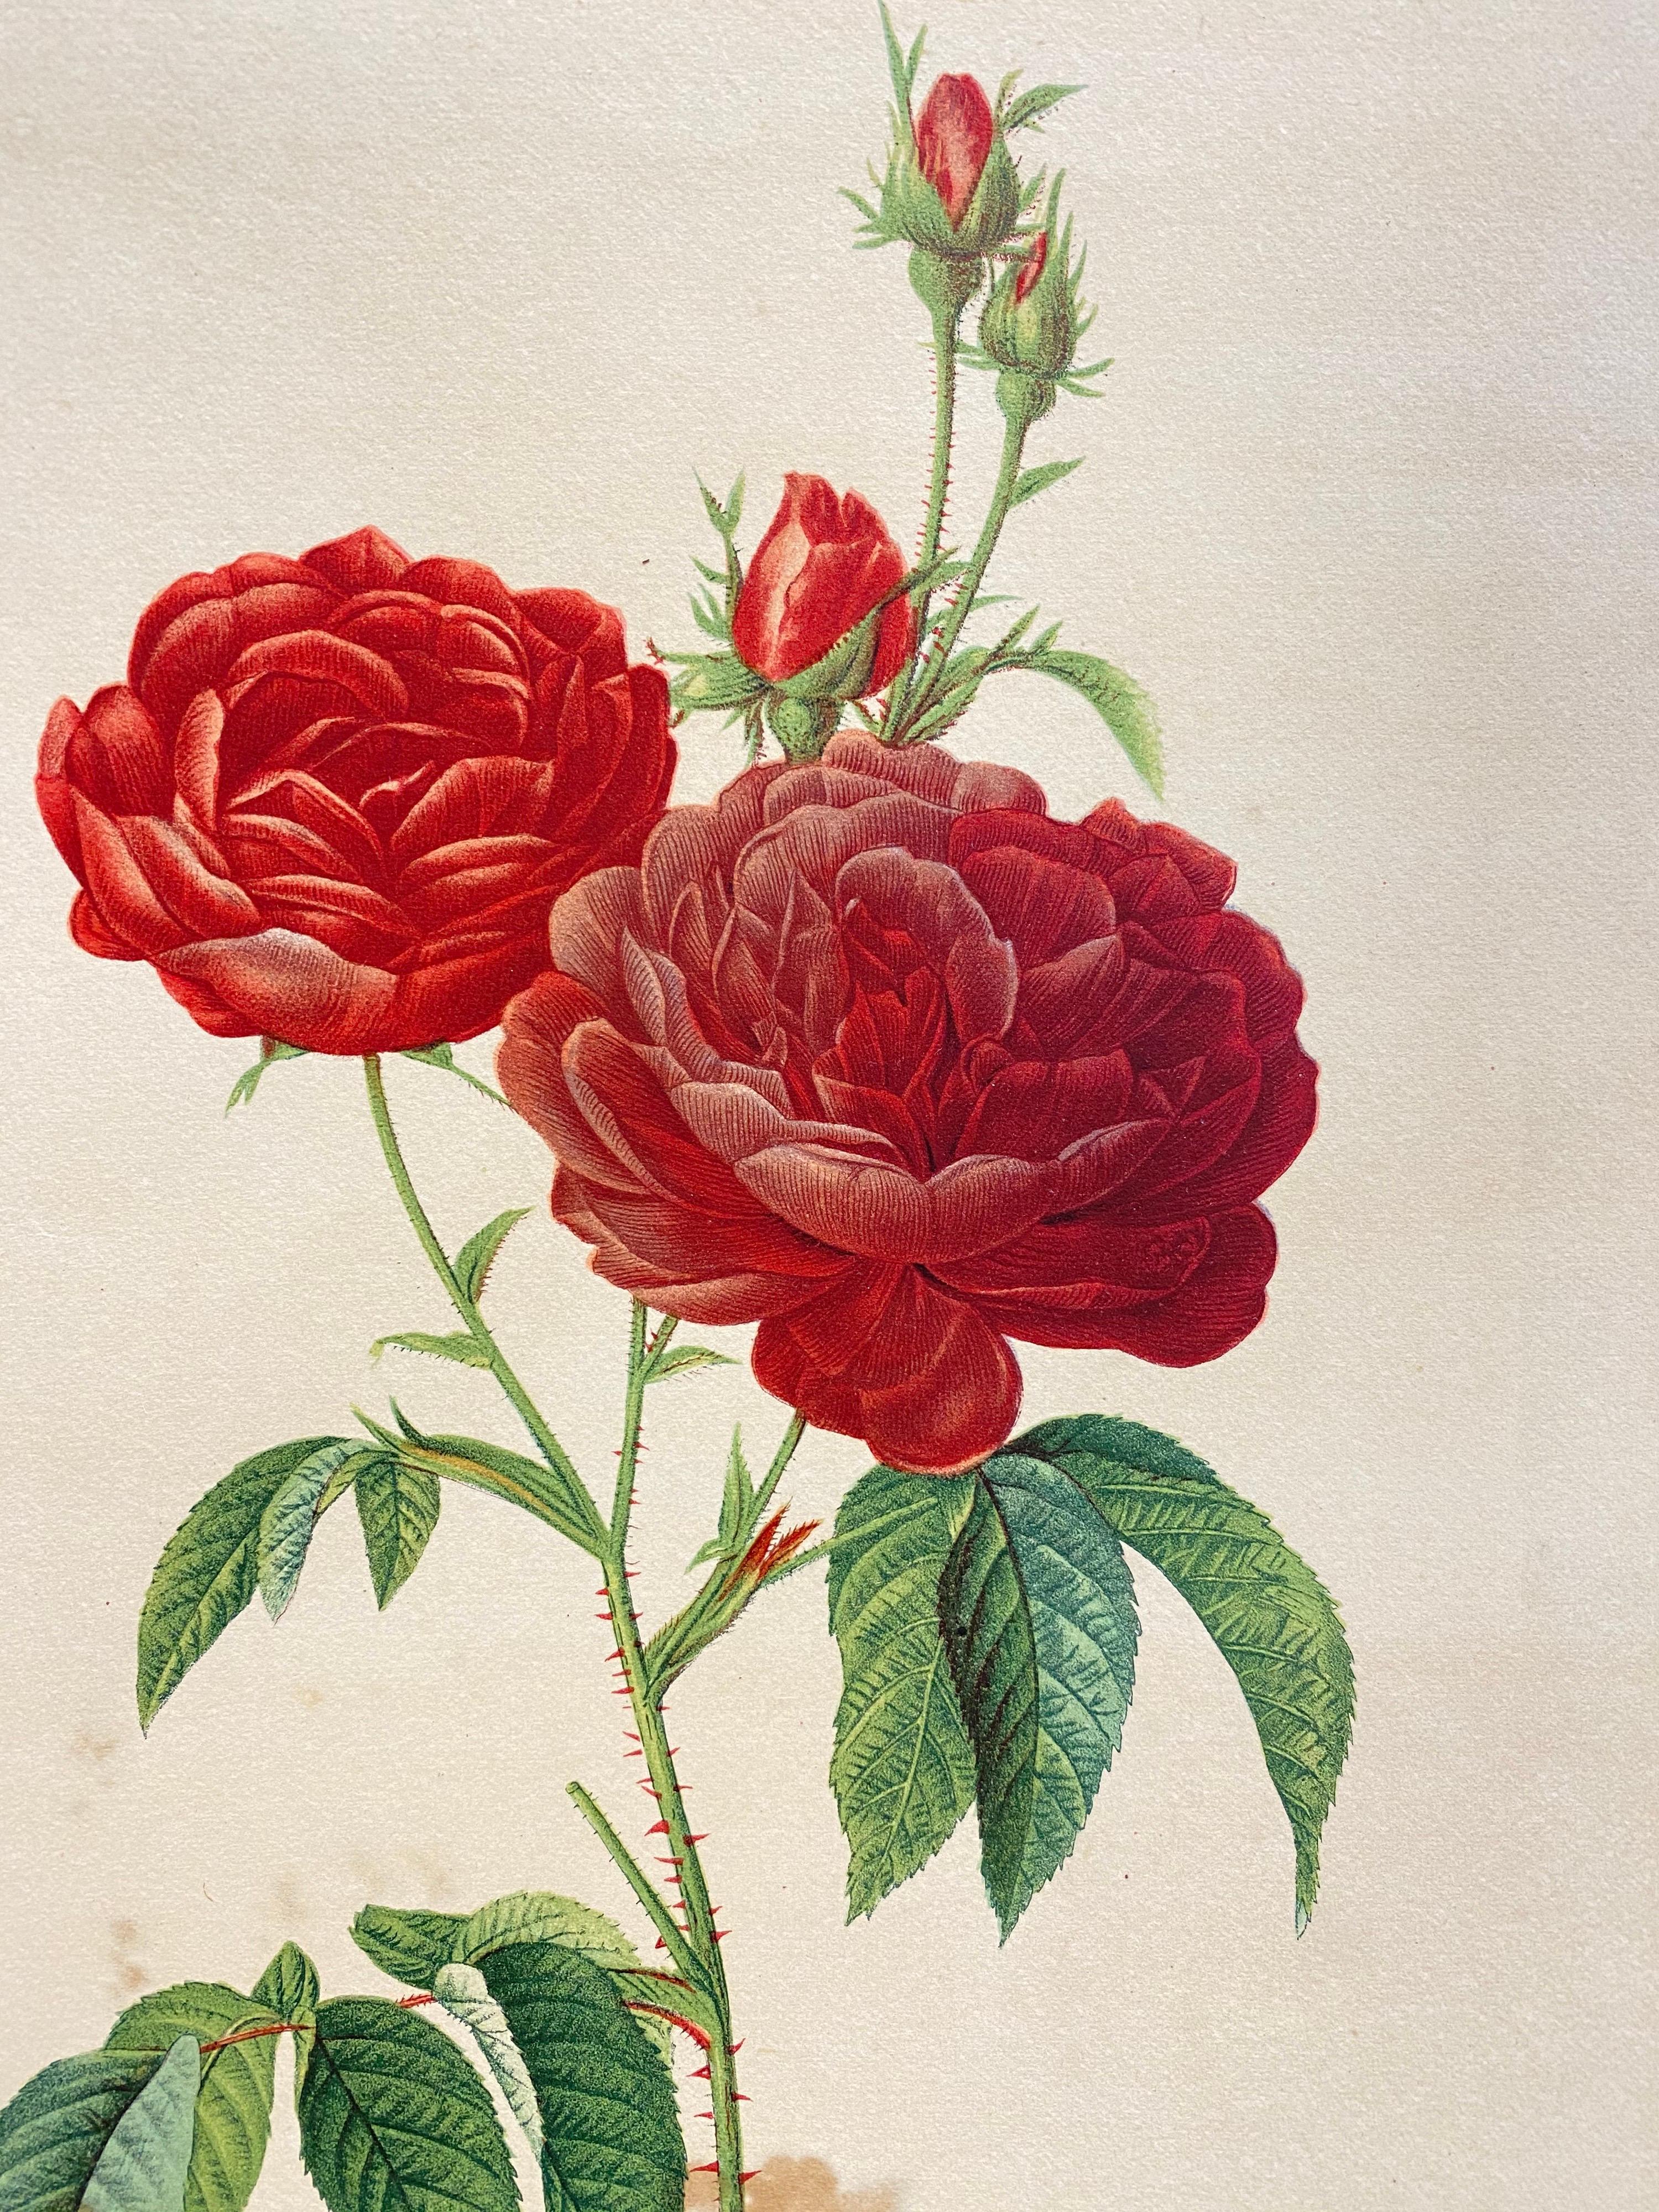 La Redoute
set of six French vintage color prints of roses
size: each print is 16 x 12.5 inches, unframed. 

Condition report: 
each print is in sound condition, minor age related staining and markings as the items are vintage.